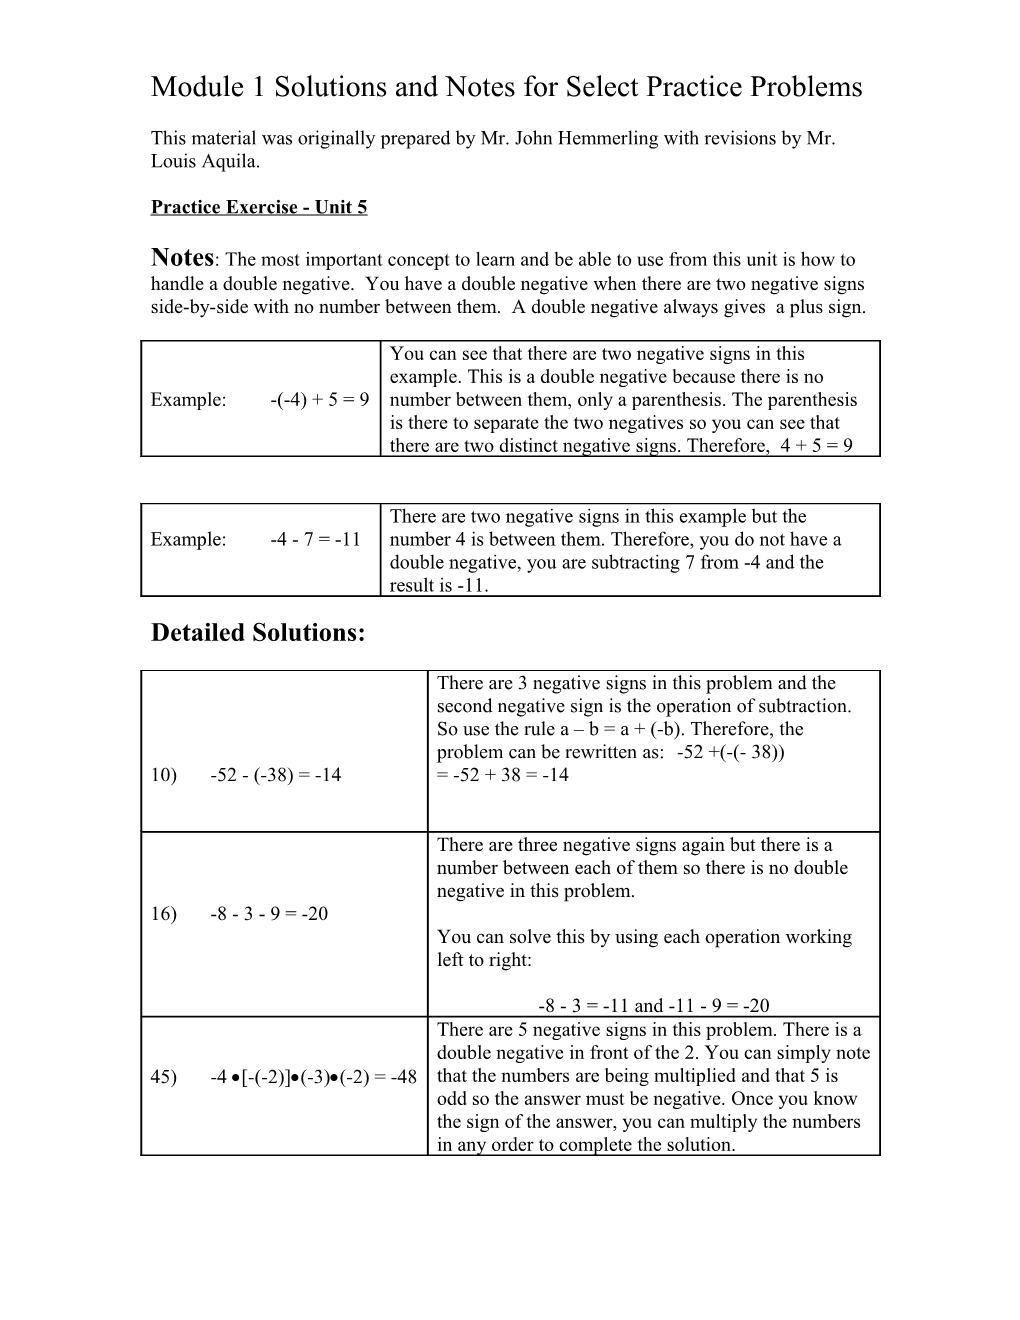 Solutions and Notes for Select Practice Problems from Module 1